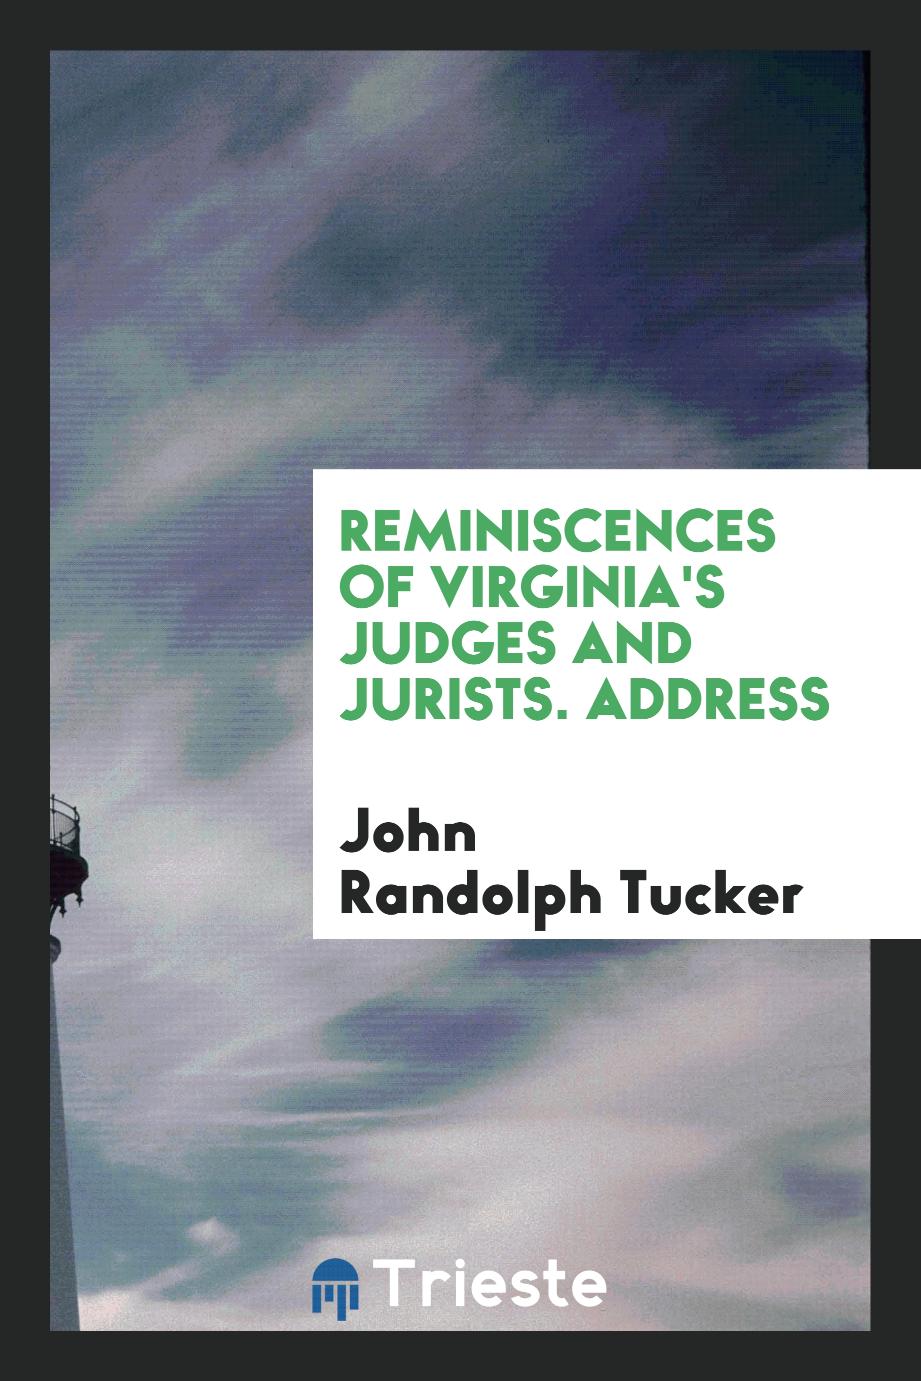 Reminiscences of Virginia's Judges and Jurists. Address